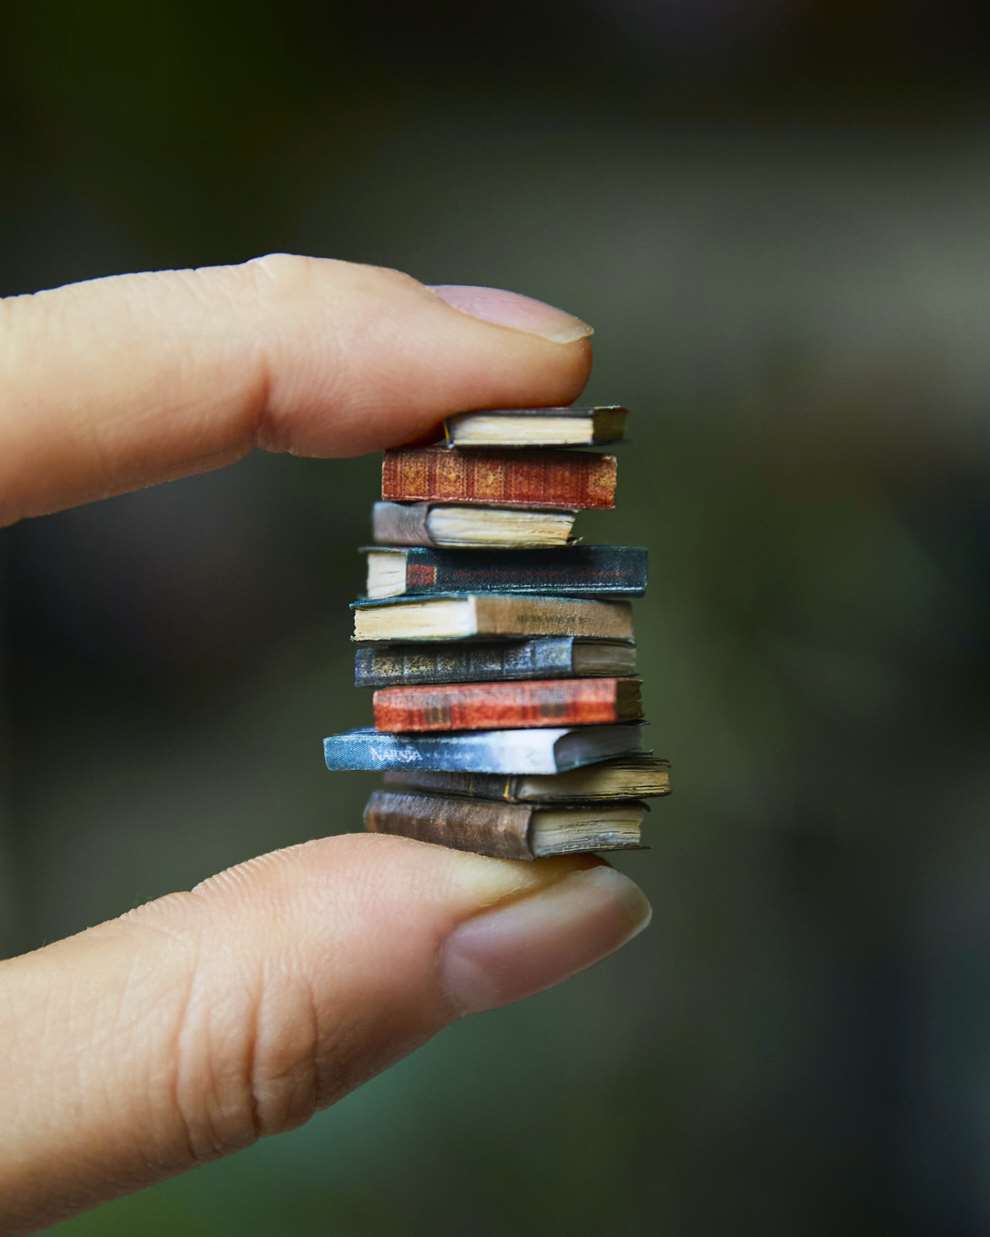 Hannah Lemon, Miniature collection of tiny books made from air drying clay, paper, wood, paint. Mixed media tiny creation.